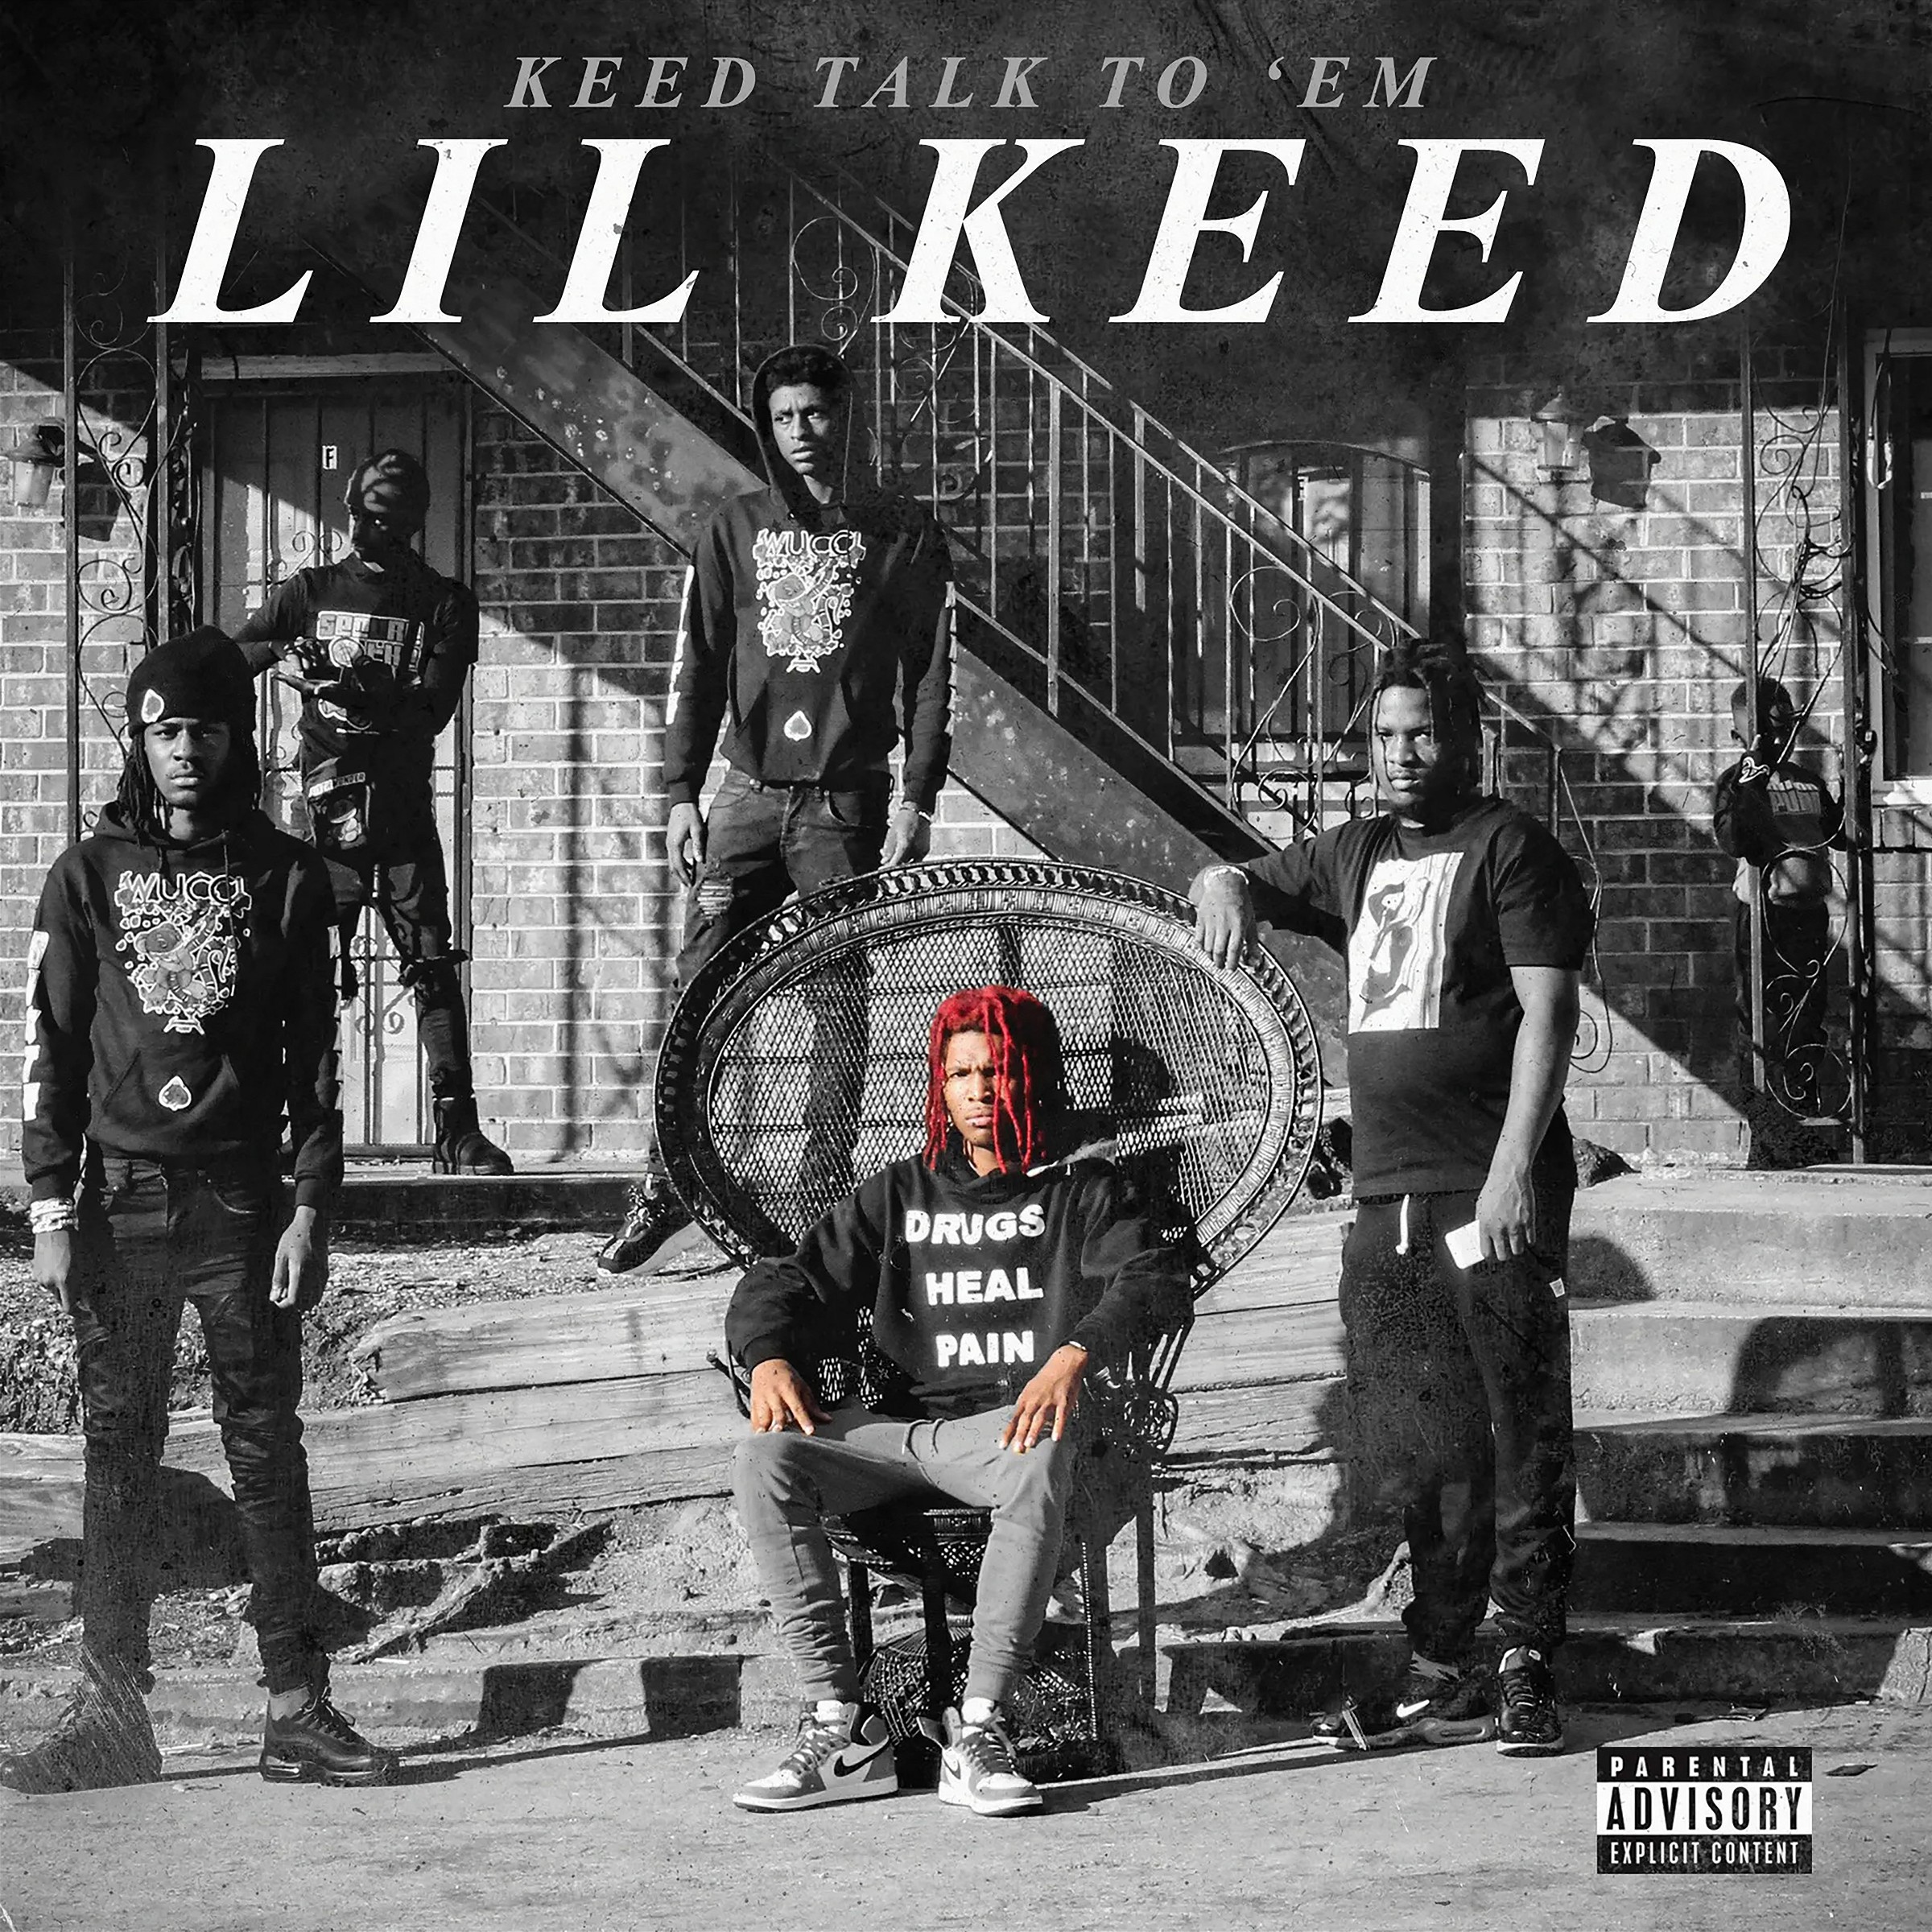 Lil Keed Keed Talk To Em Album Cover Poster Lost Posters